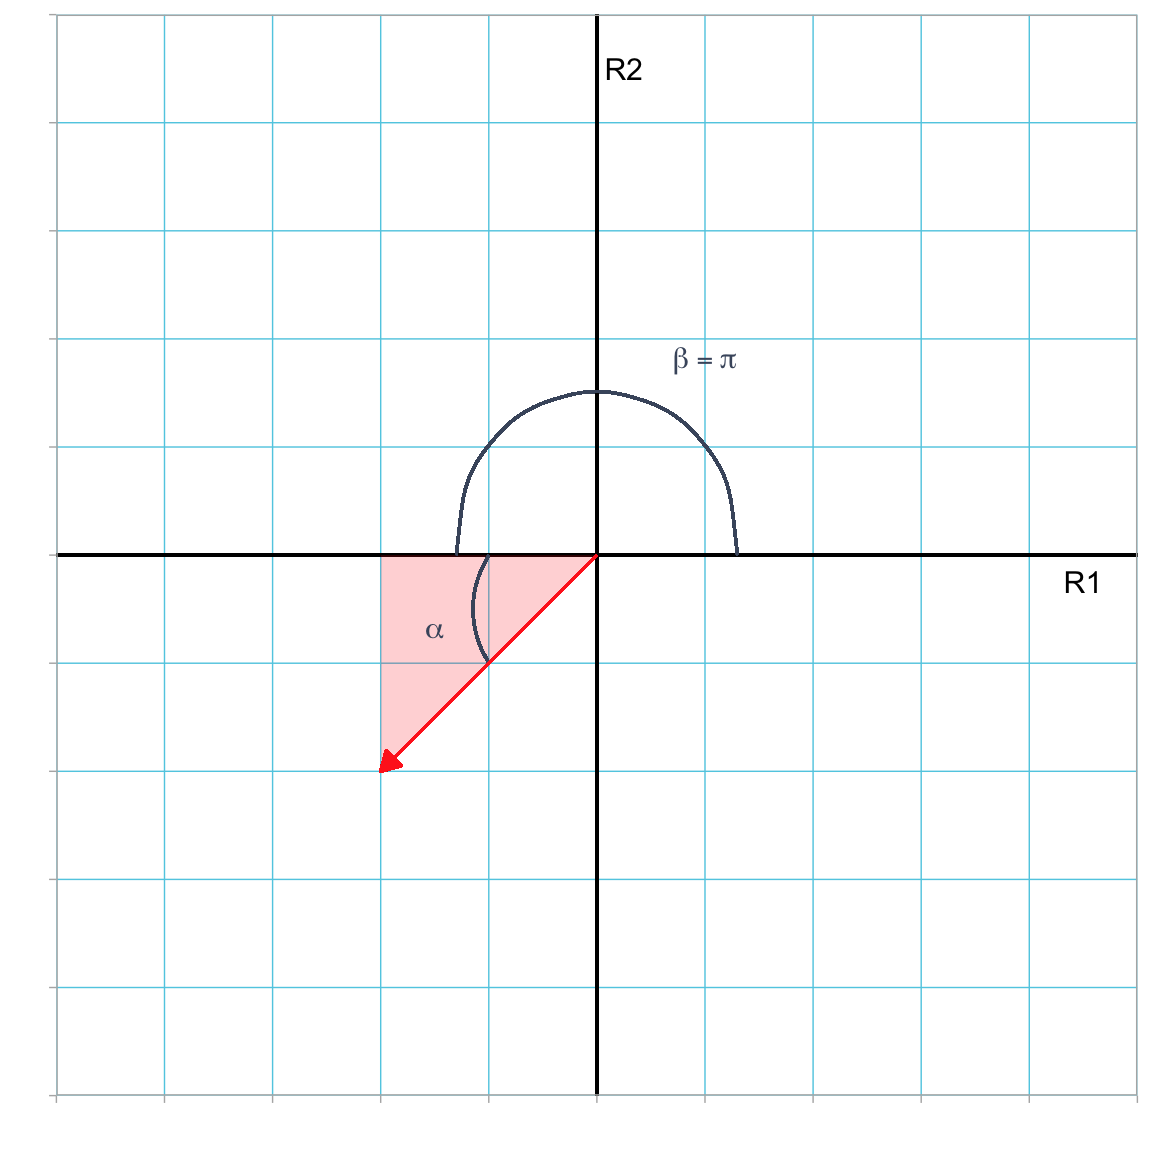 Plot showing vector (-2, -2) (in red) in the R1--R2 dimensional space. The direction of this vector is the measure of the angle ($\theta$) between the vector and the horizontal reference axis measured in the counter-clockwise direction from the axis. Here we have split this angle up into two parts; $\alpha$ can be computed using a trigonometric function, and $\beta = \pi$ radians.